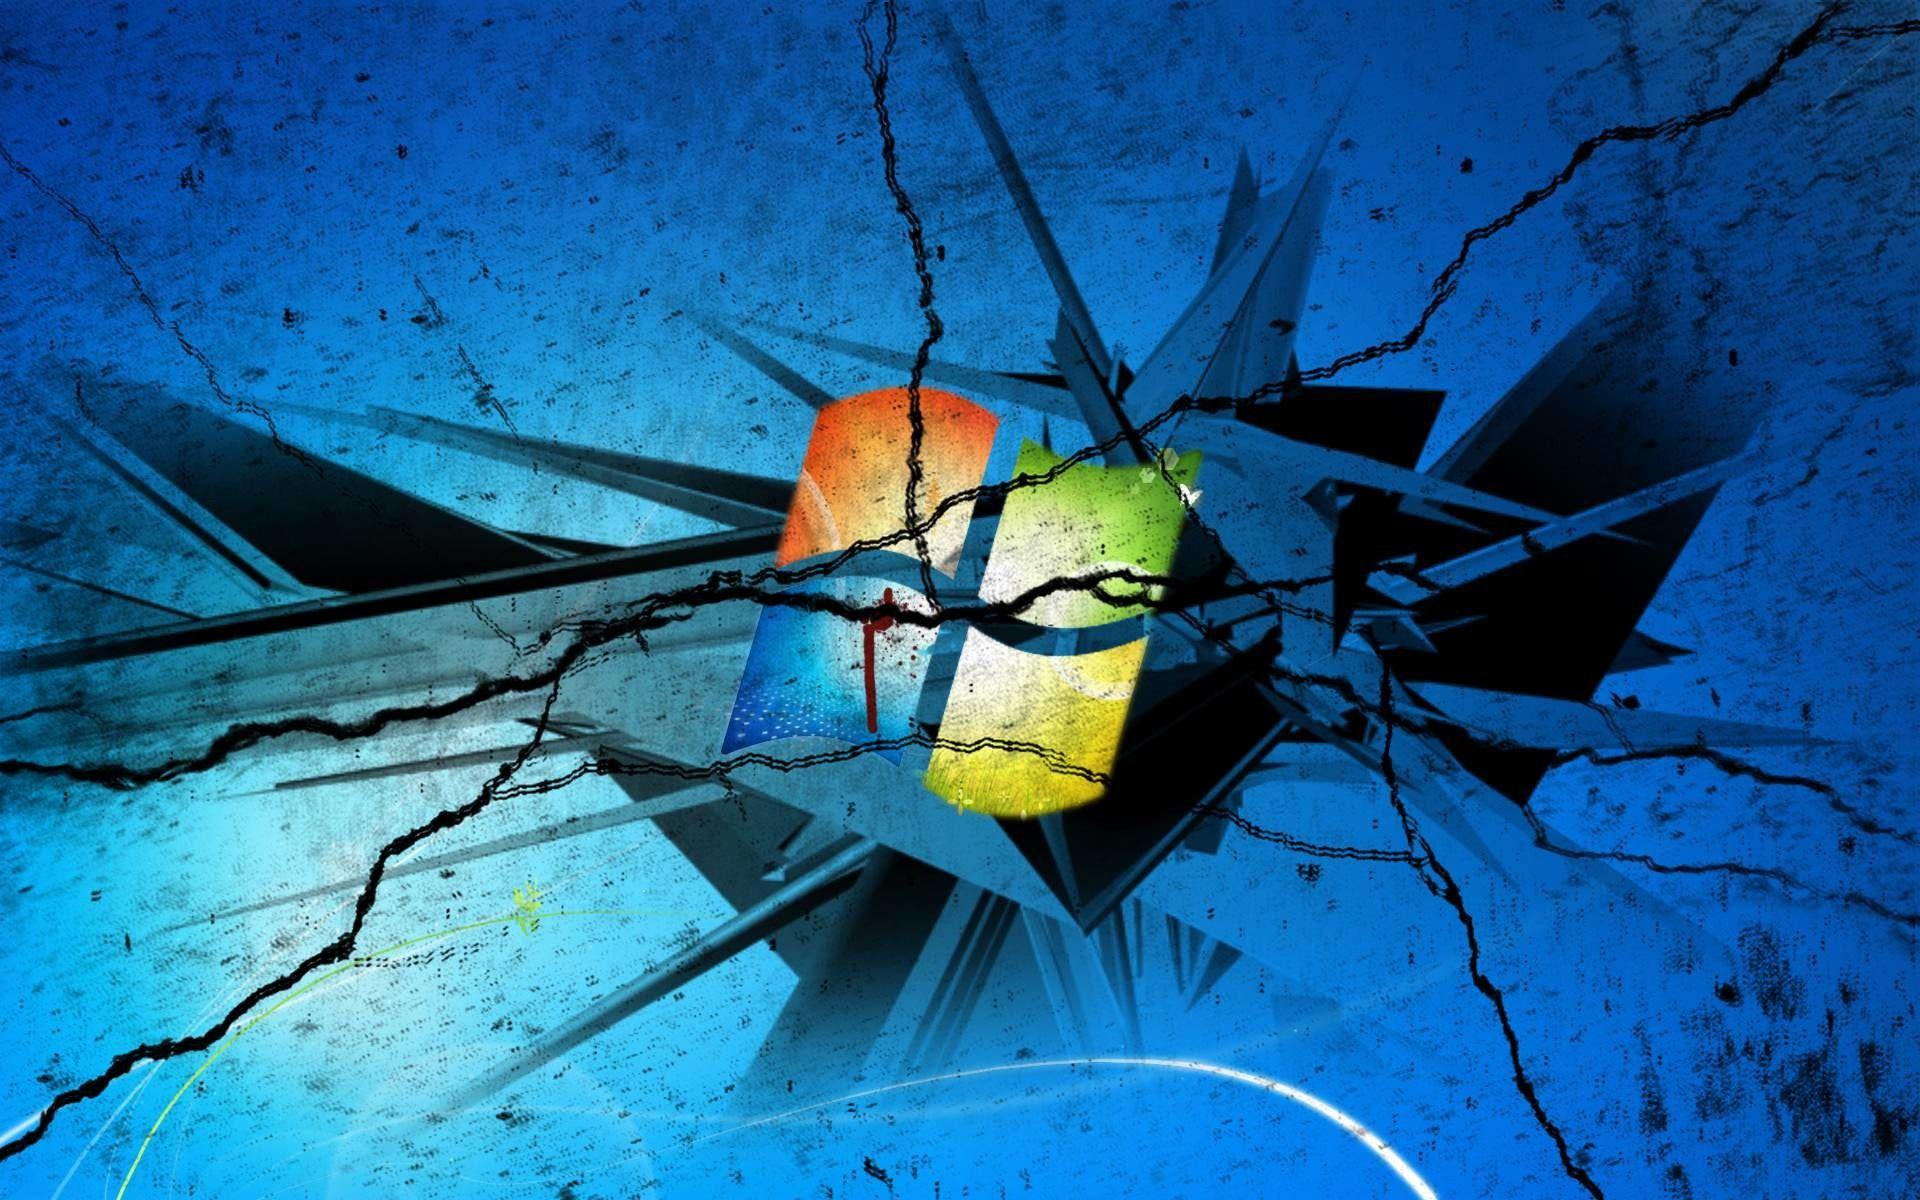 cool cracked windows backgrounds